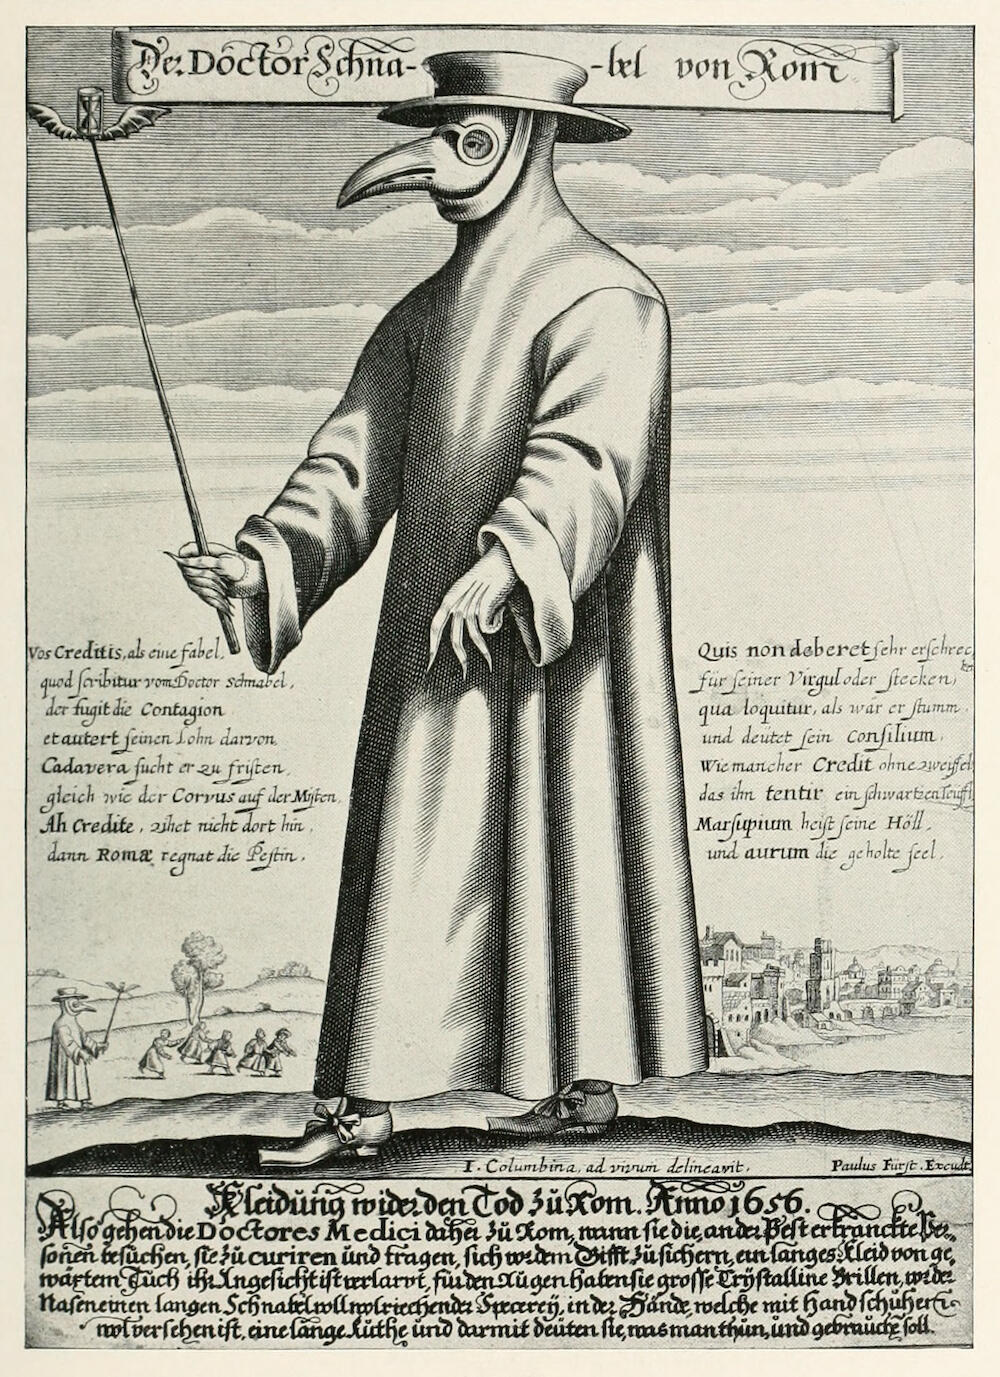 A plague doctor with claw-like fingers wearing a beaked face mask, hat, long robe, and shoes tied with bows